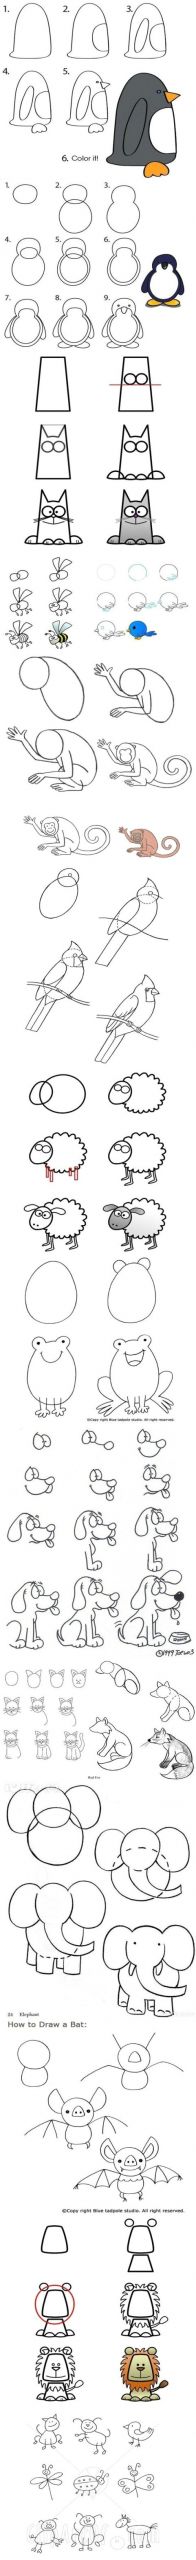 How to Draw Cool Animals Cool Thing to Draw Cool An Easy Drawings Home Design Ideas